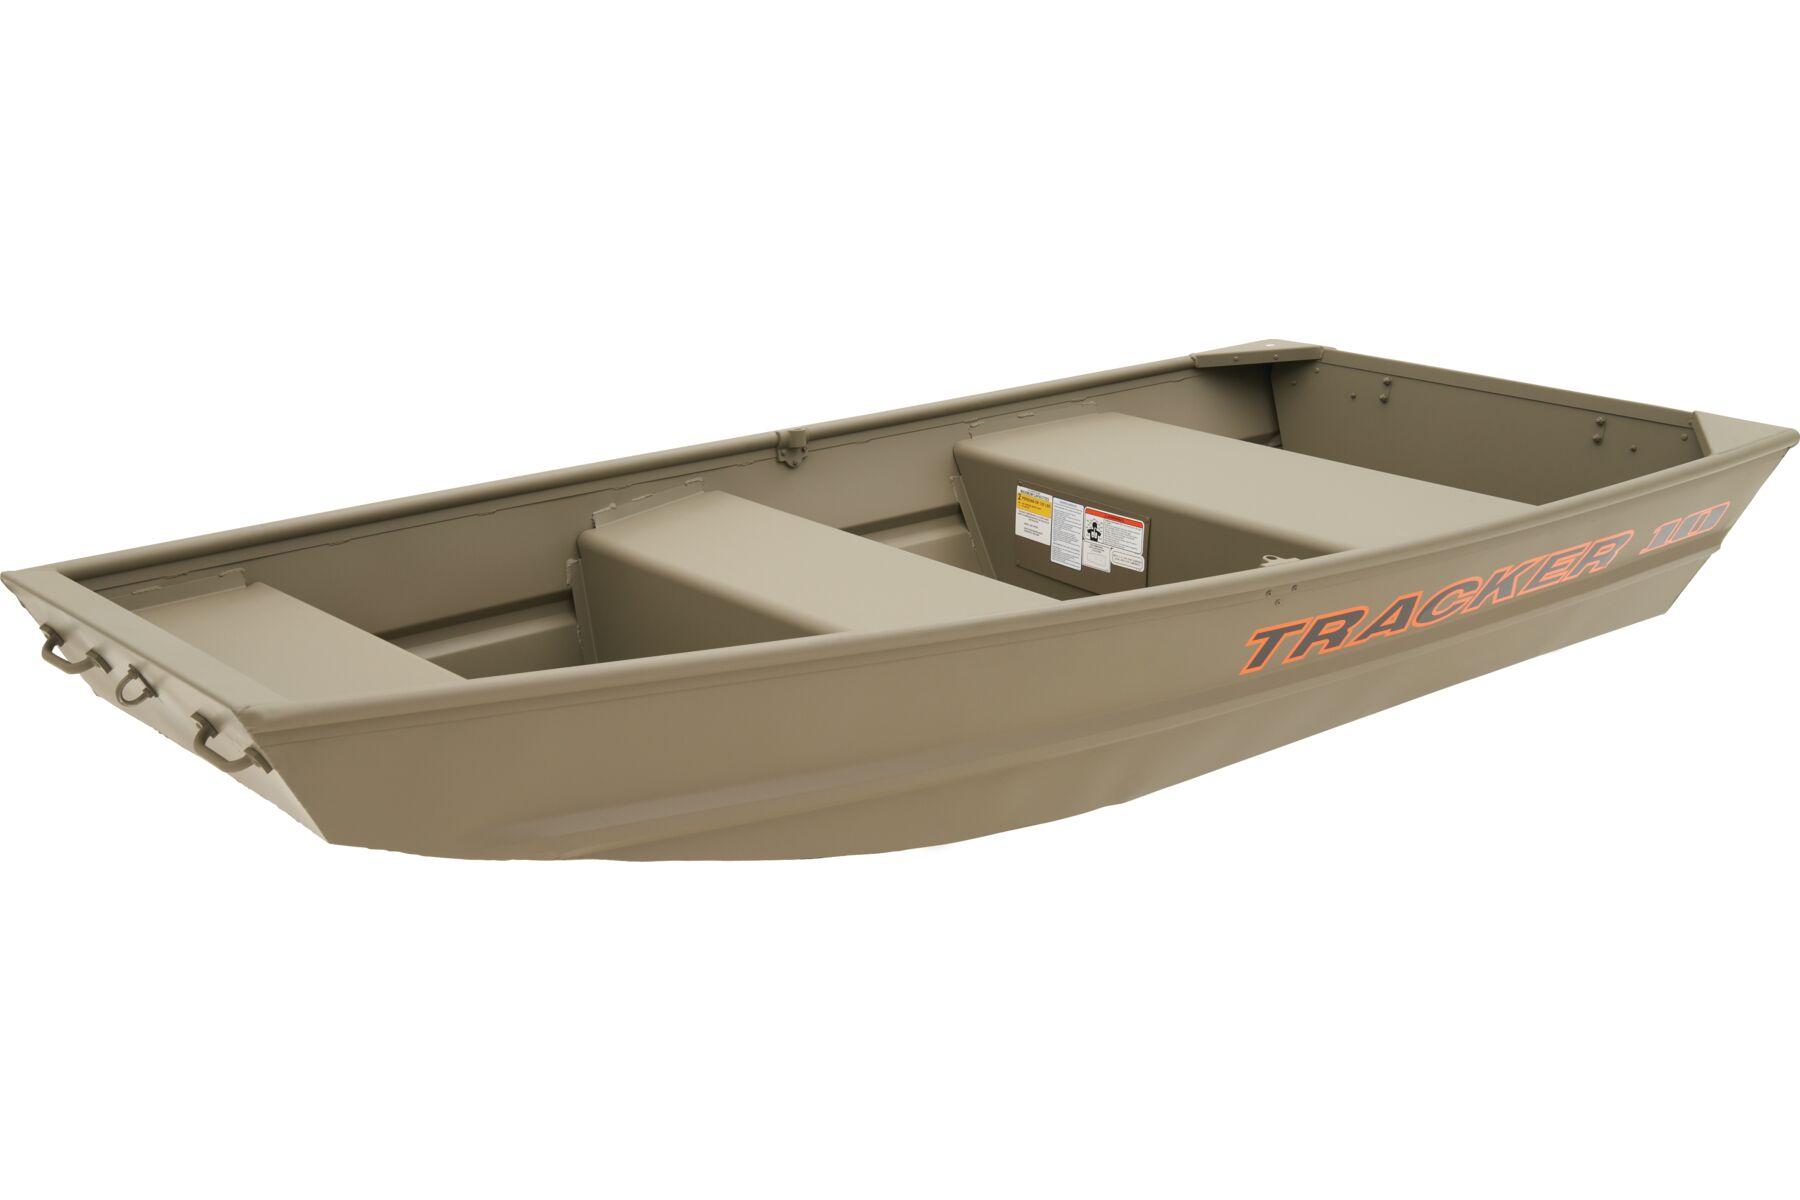 Page 2 of 250 - Aluminum fish boats for sale - boats.com